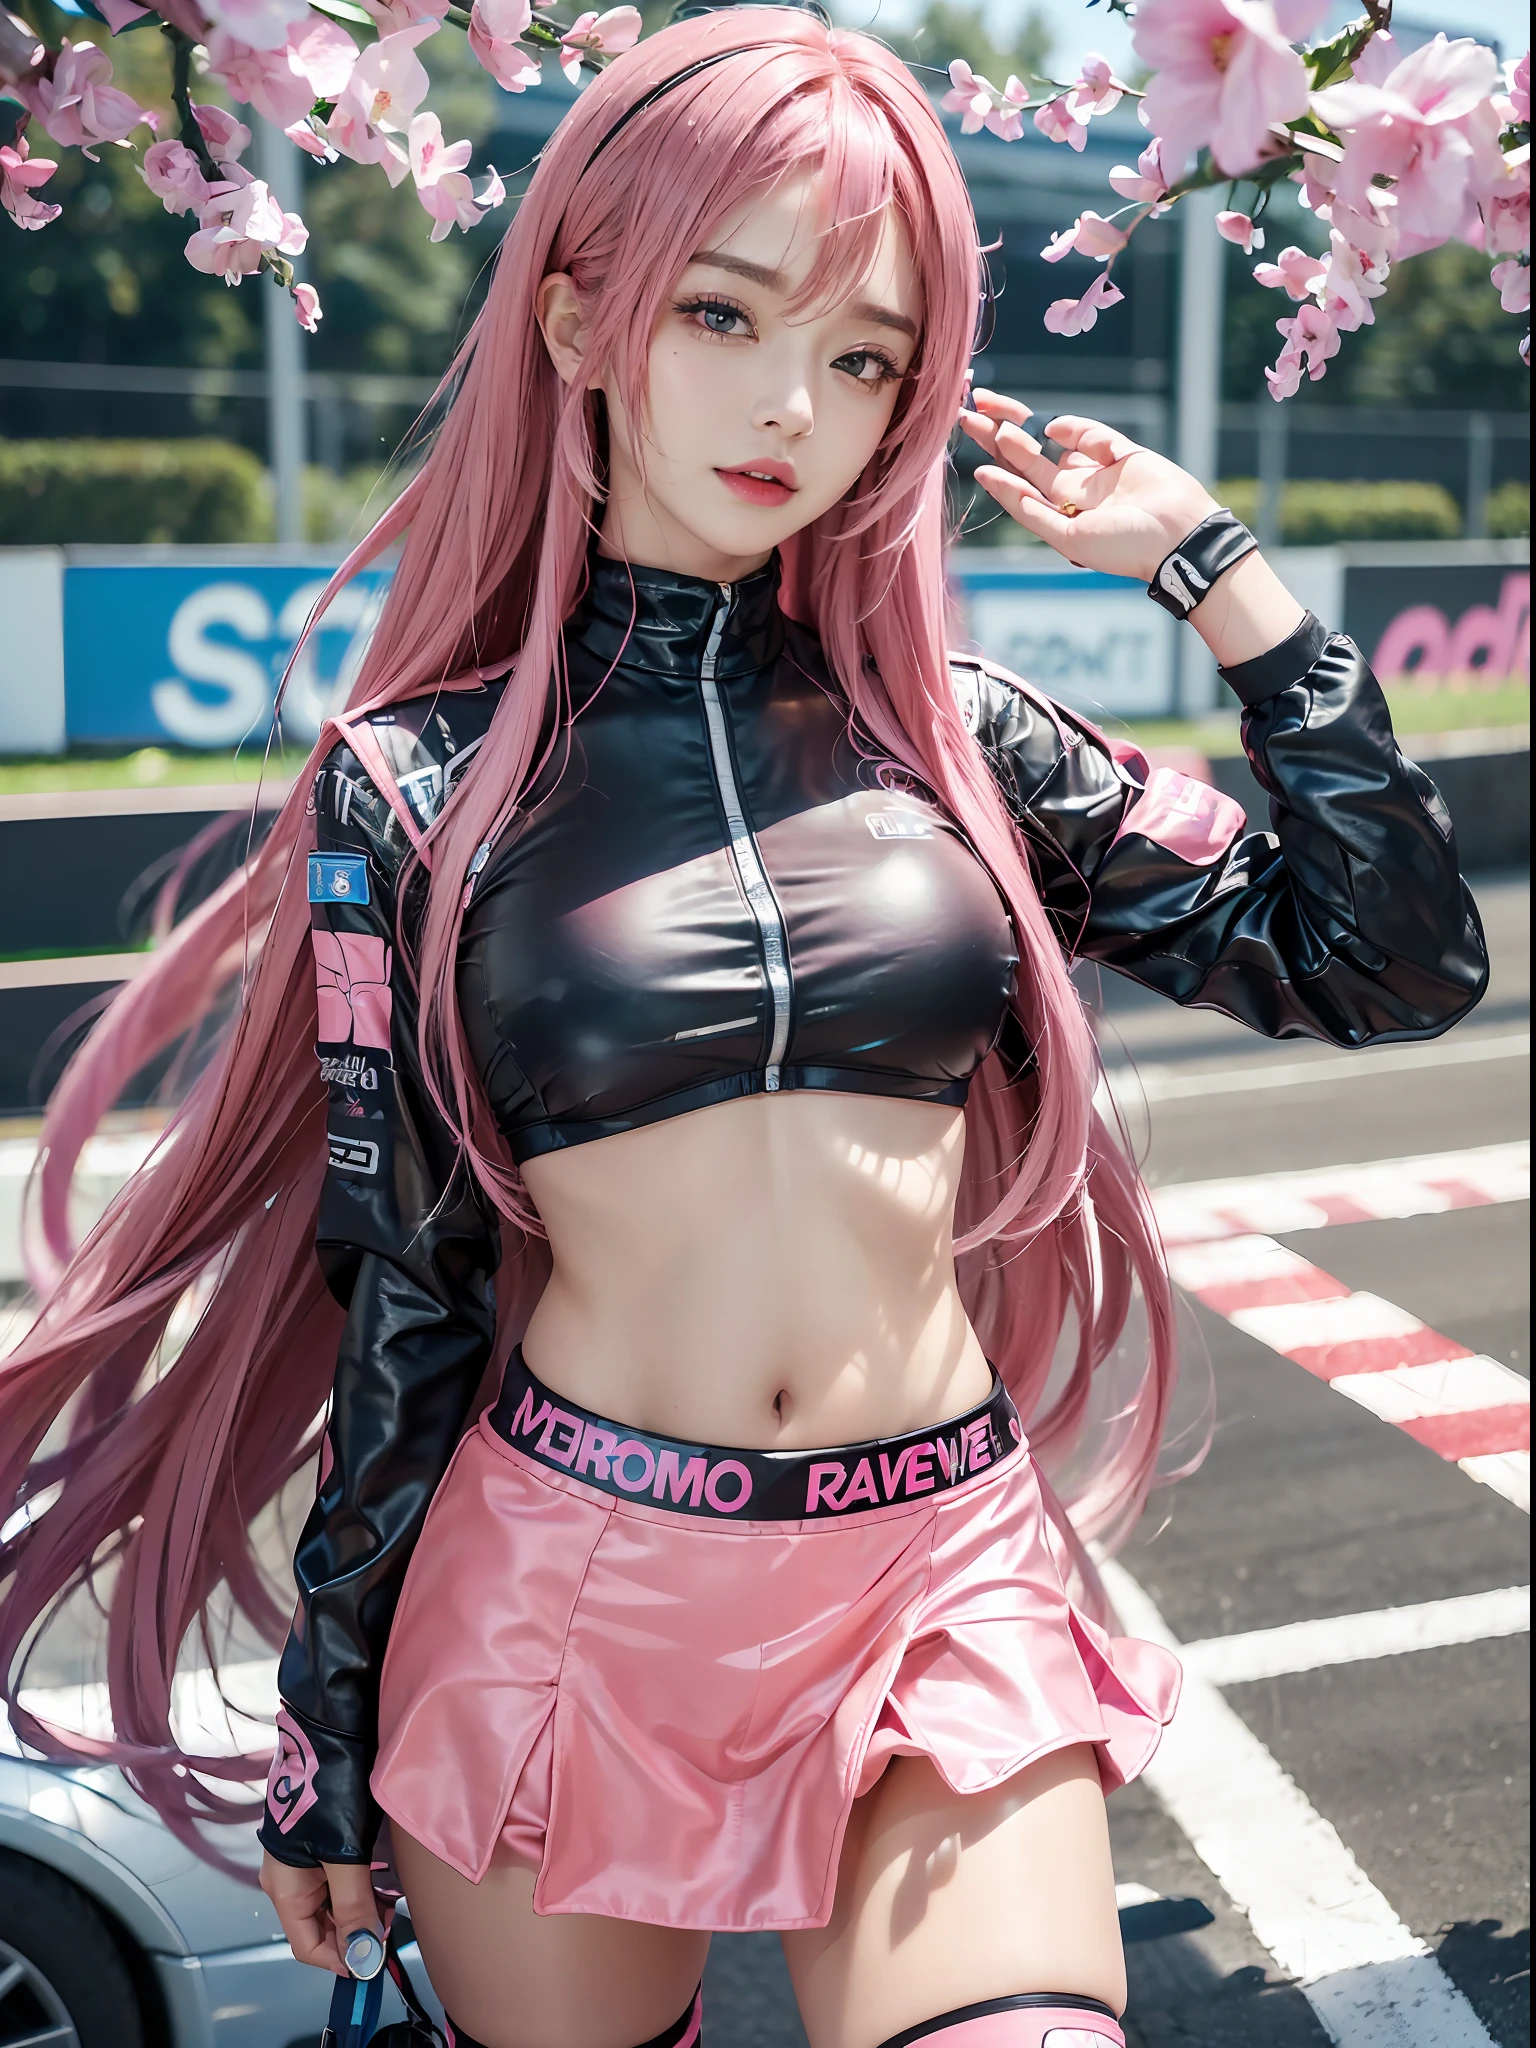 Top Quality, Ultra High Resolution, (Photorealistic: 1.4), (Pink Long Hair: 1.3), (Azure Lane\), One Girl, (Kpop Idol), Watch Audience, Detailed Face, Contrappost, Smooth Skin, Perfect Anatomy Professional Lighting, Futuristic Fashion, Streetwear, High-Tech Fabric, Racing Suit, Fireproof Material, Elbow and knee pads, racing gloves, personalized embroidery, sports car background, pits, mini skirt, belly button, pink hair, Suzuka circuit, circuit home straight, race track, international circuit, SUPERGT, big breasts, big